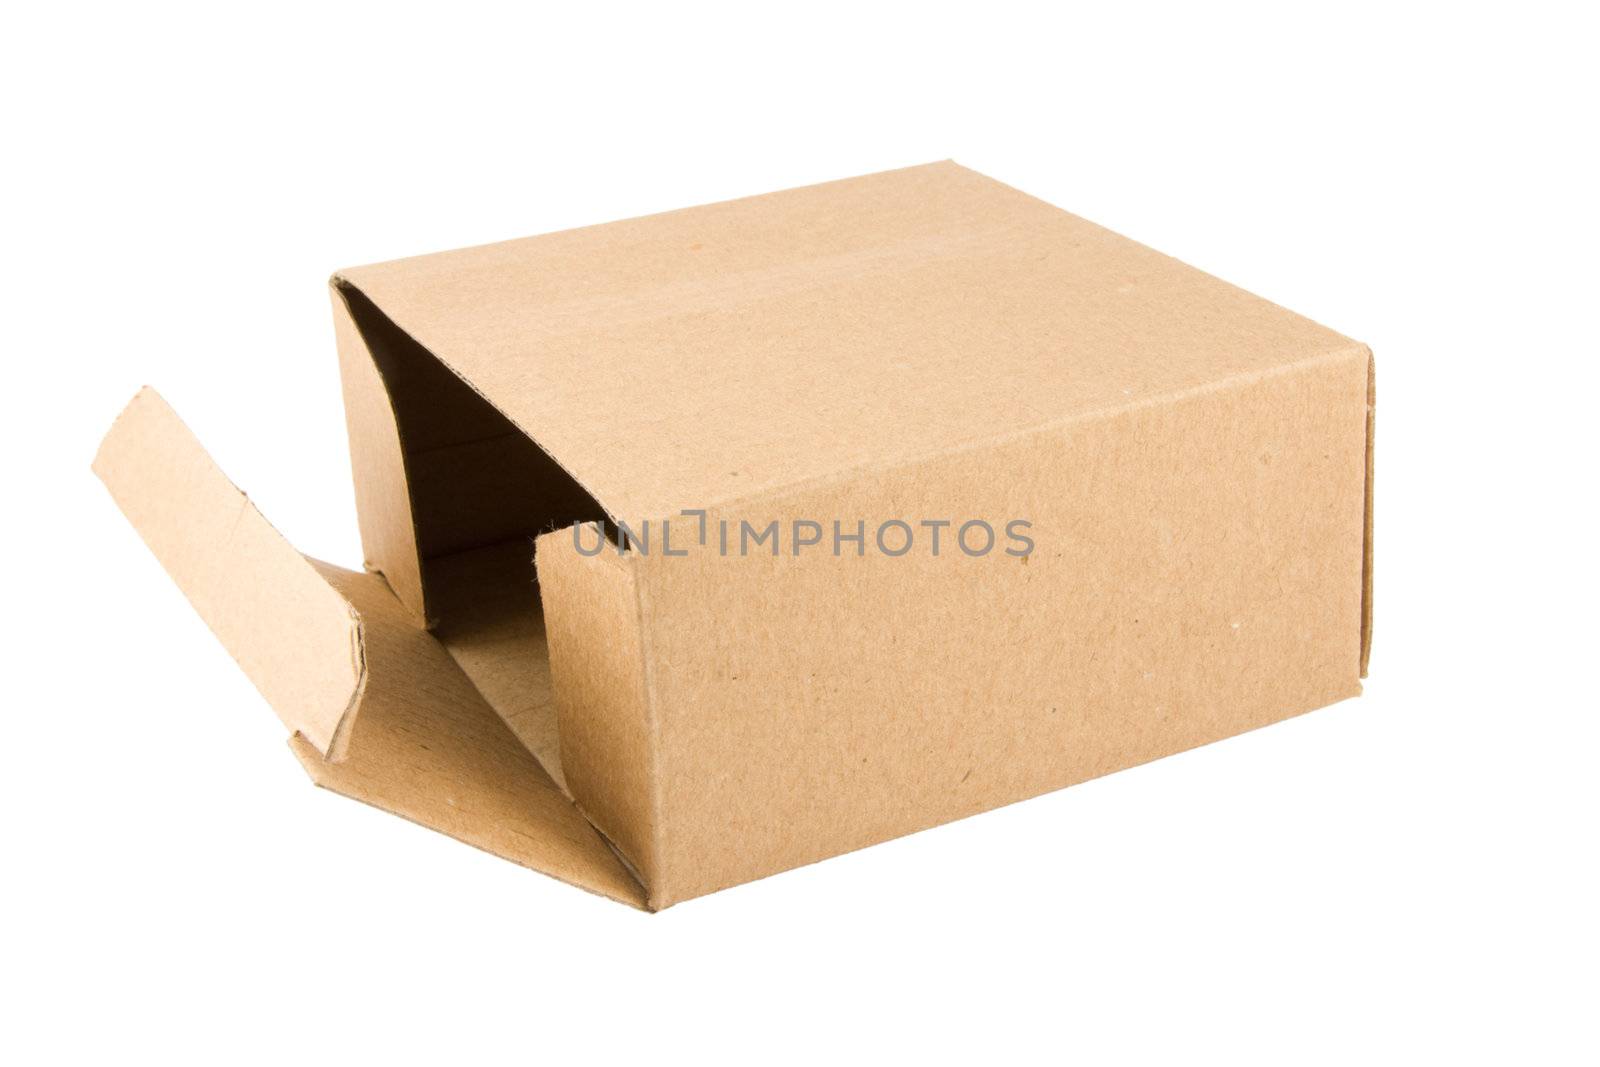 Cardboard Box isolated on a white background